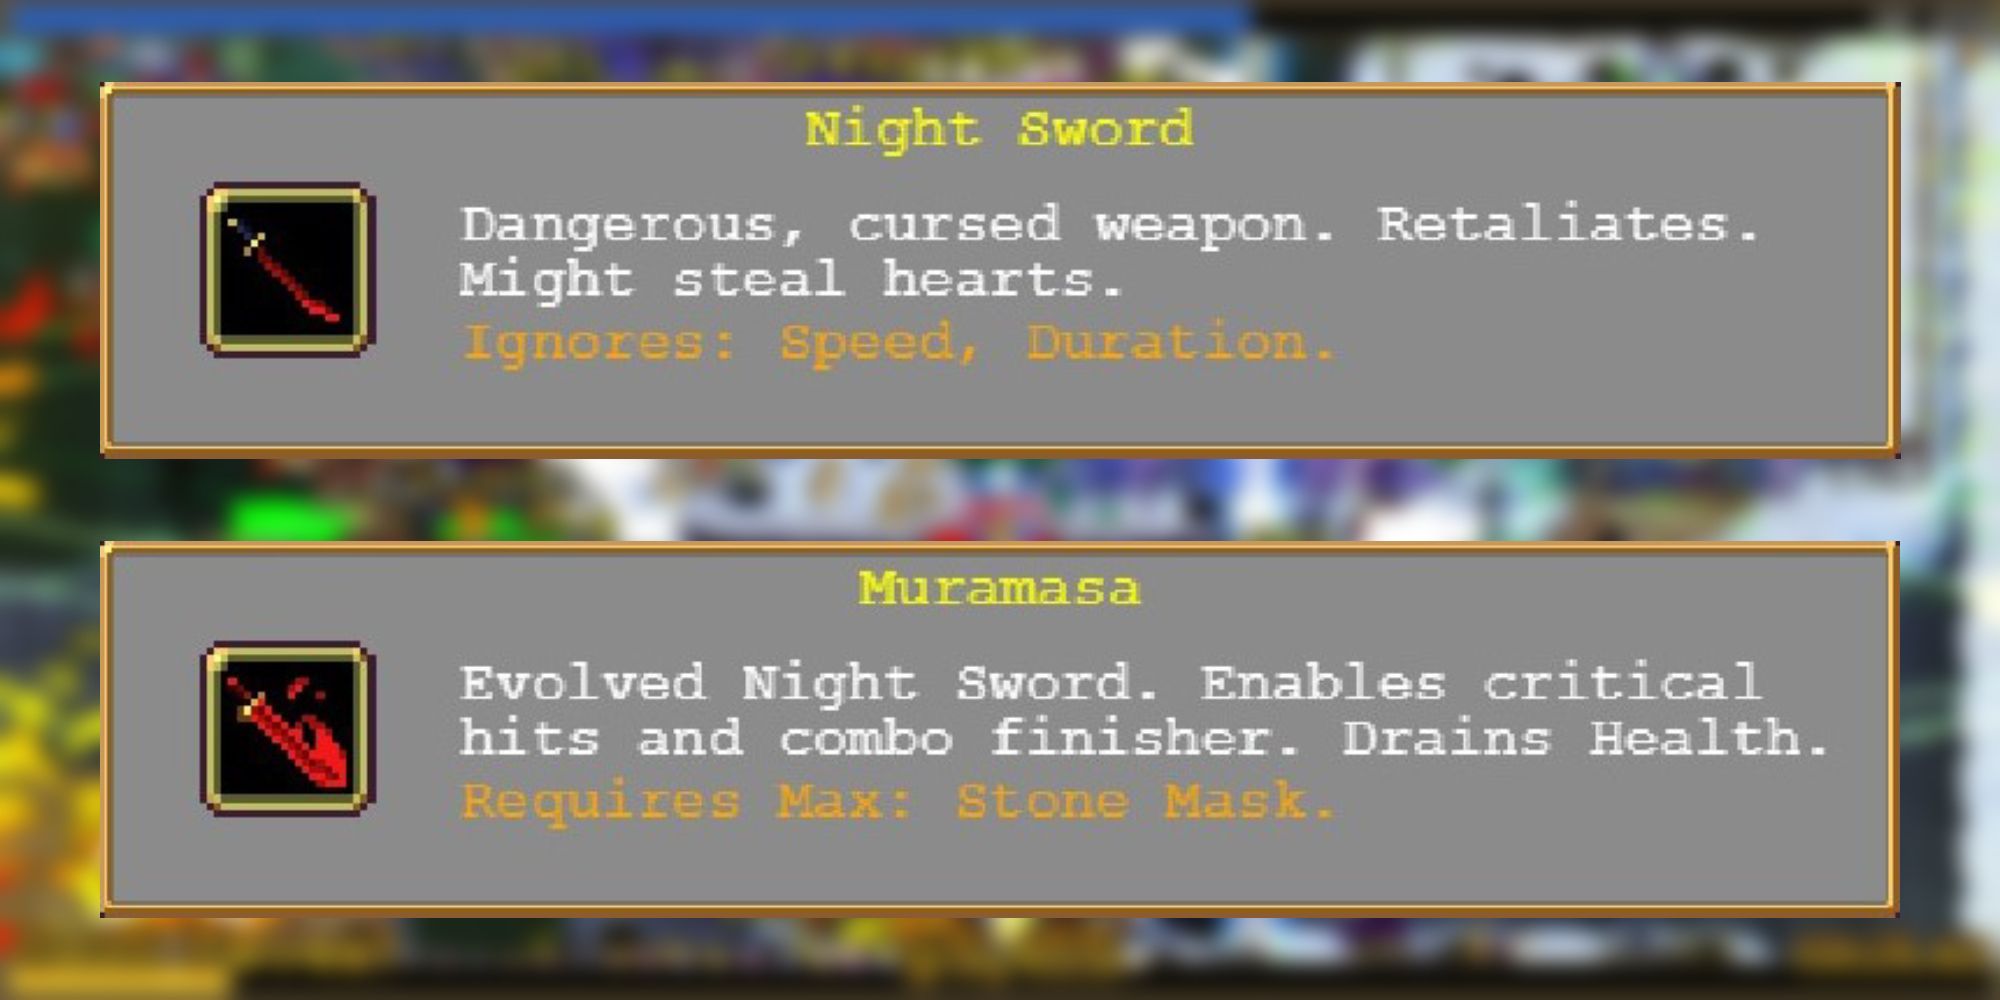 Information on the weapons Night Sword and Muramasa from Vampire Survivors.